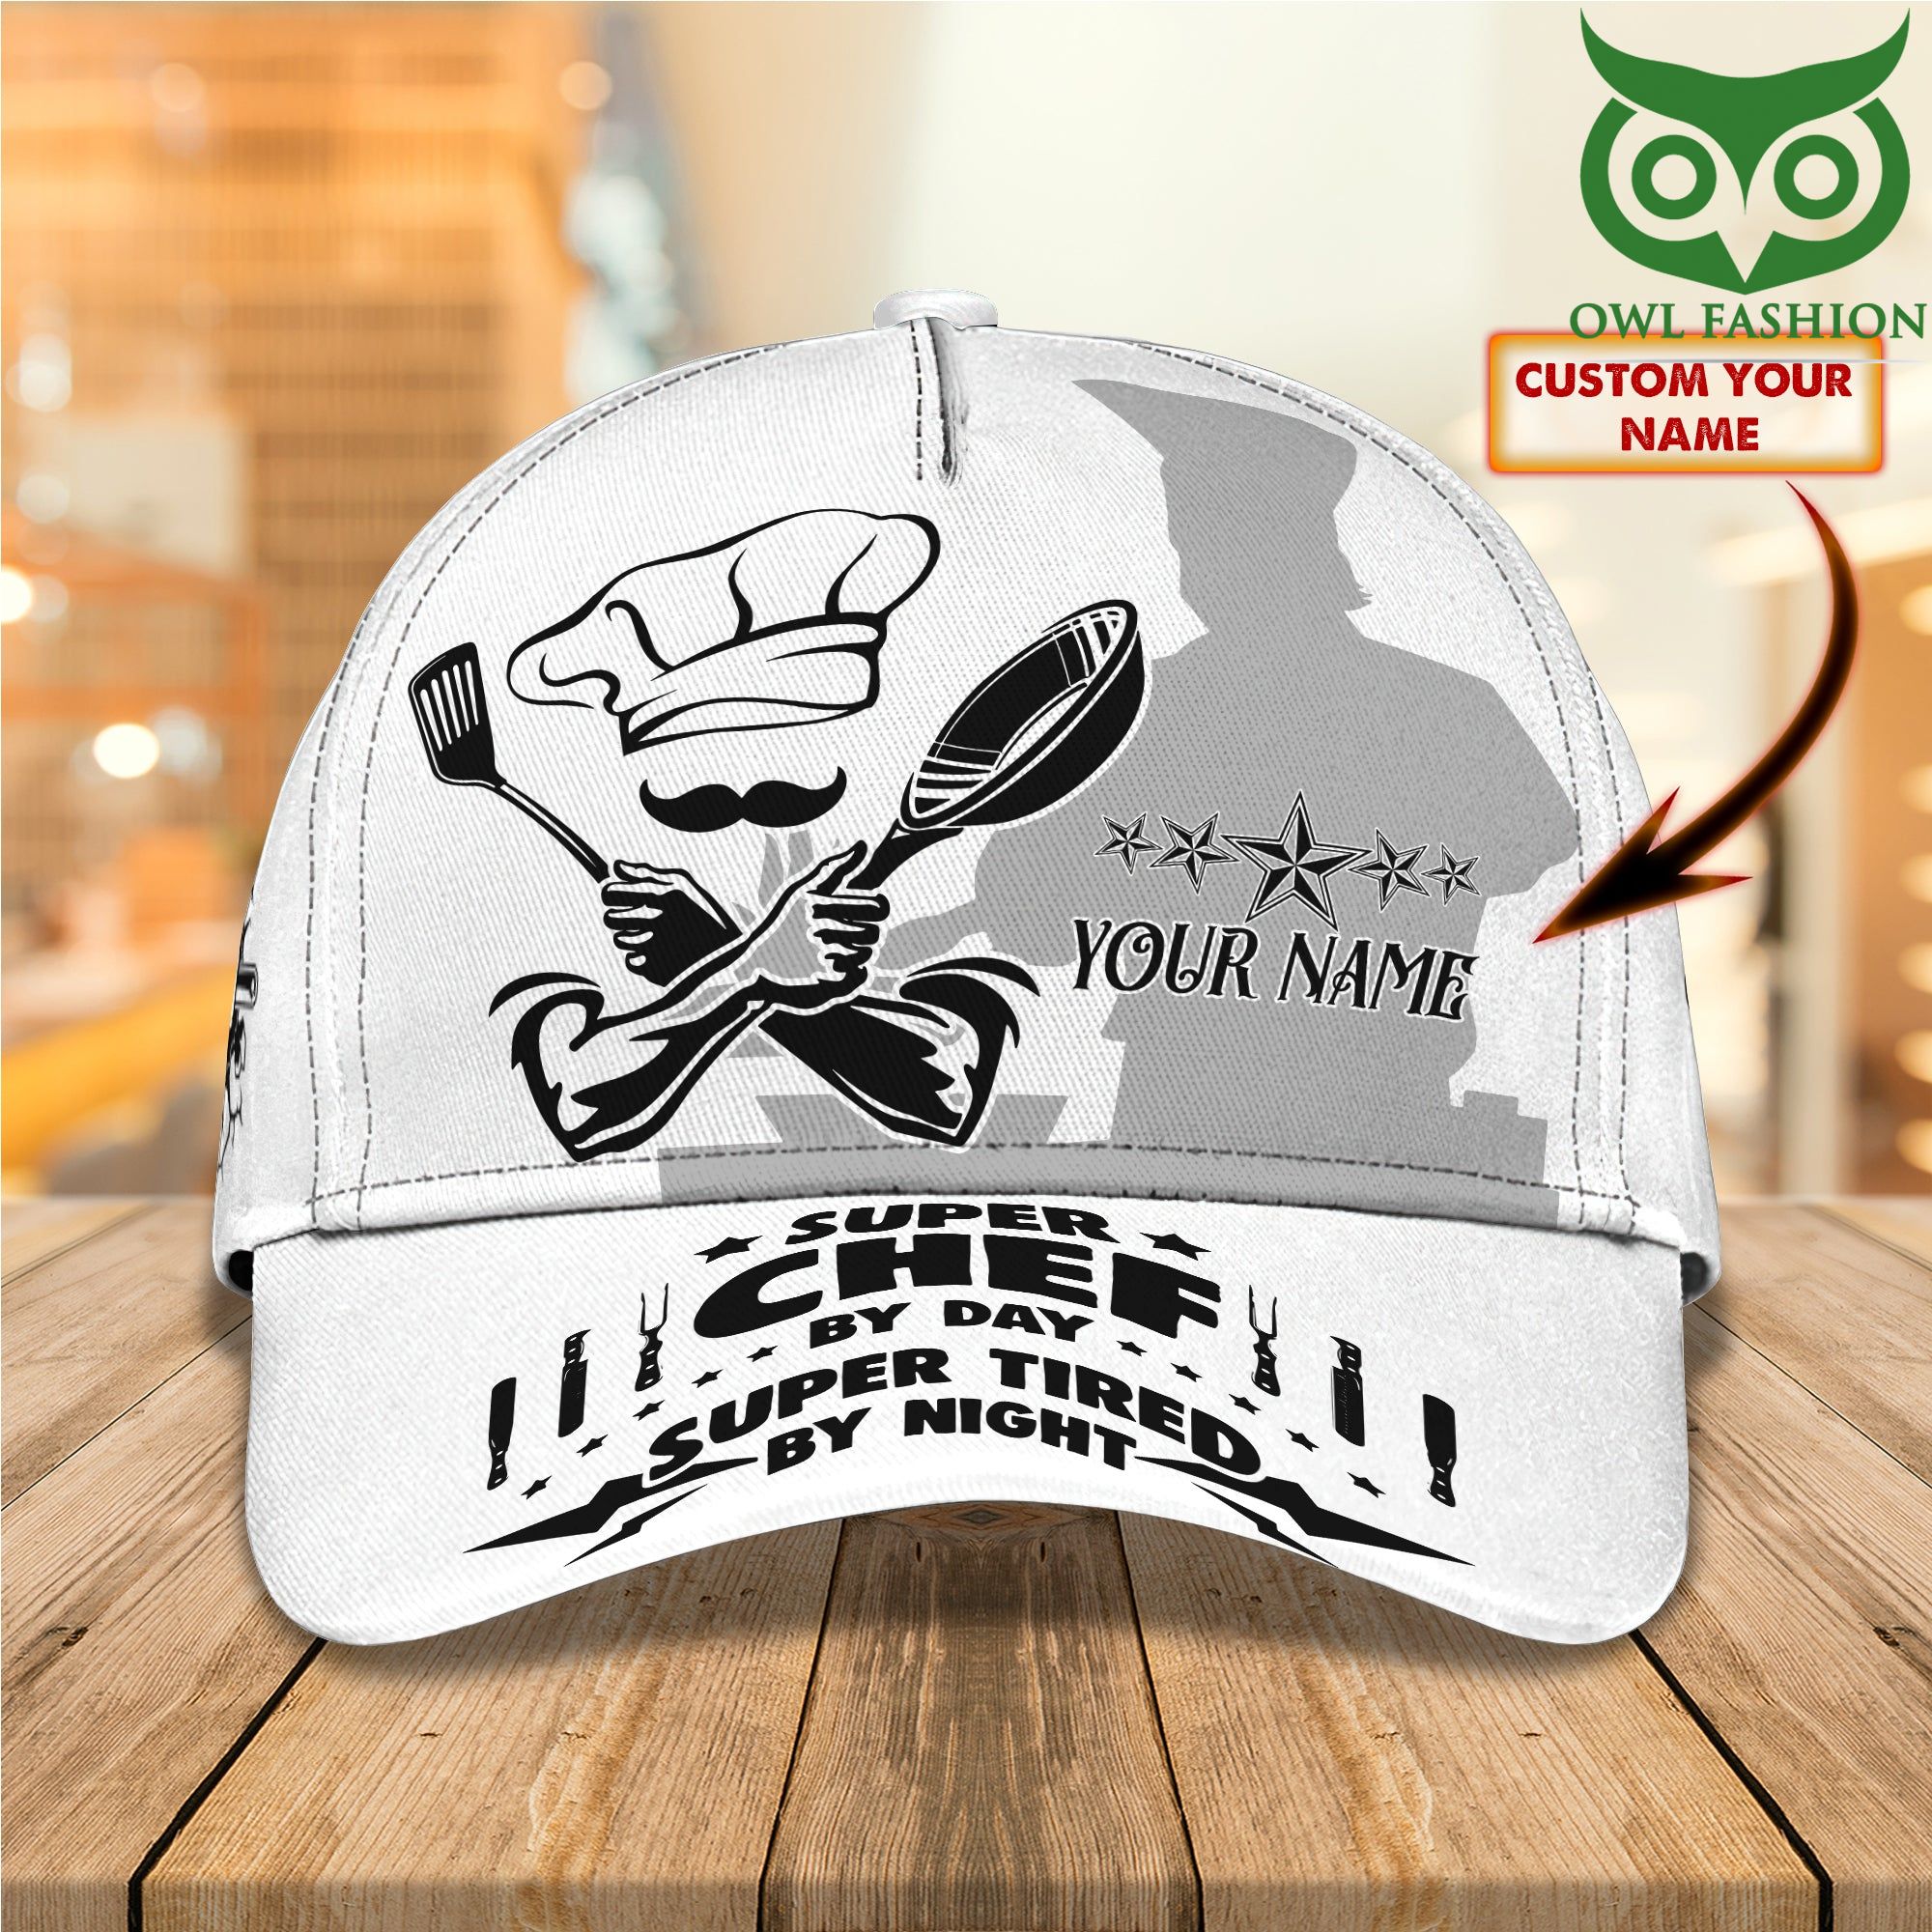 90 Super Chef by day super tired by night personalized Classic cap